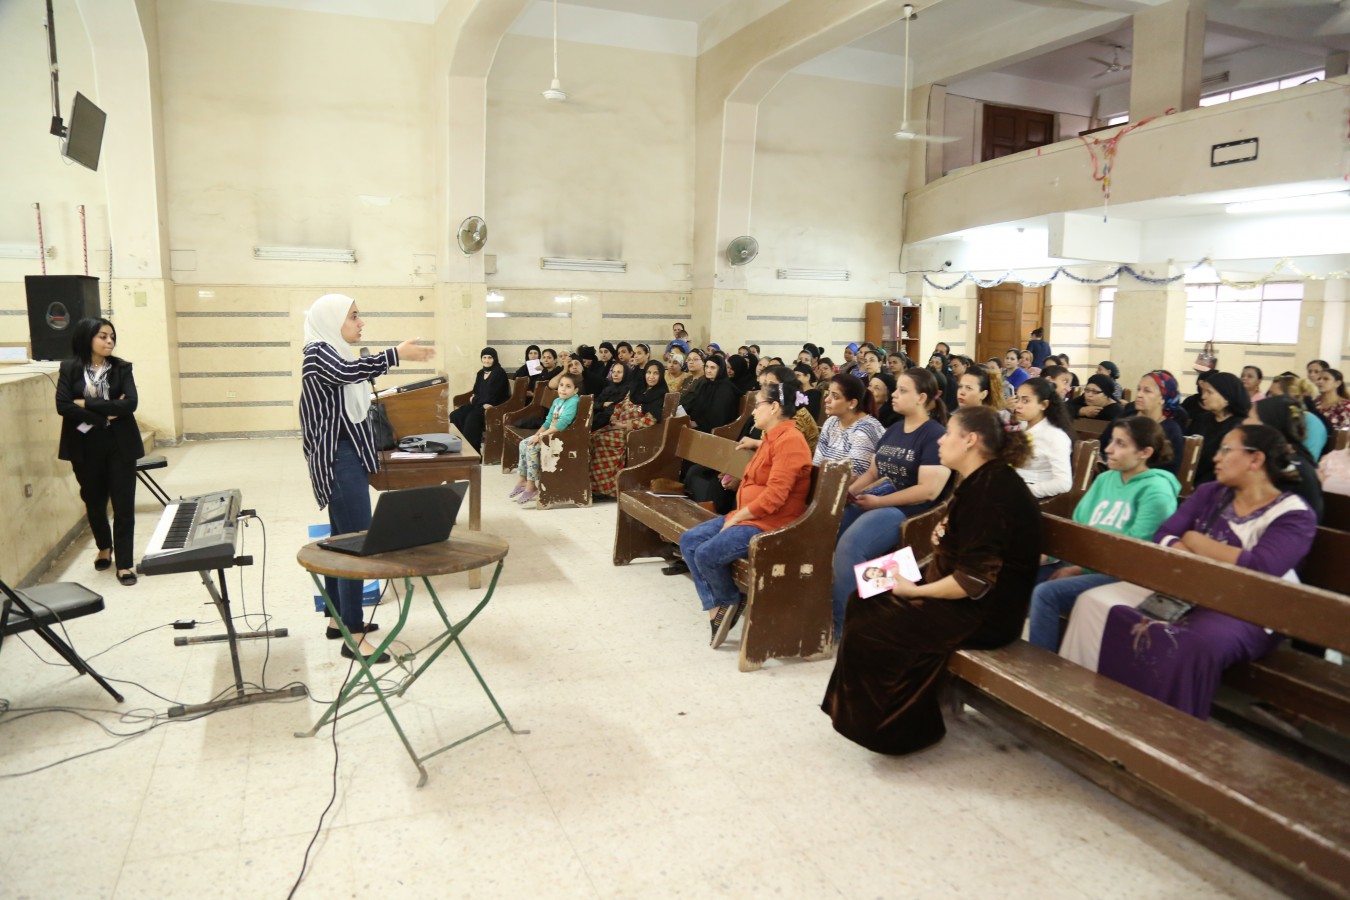 An awareness symposium in the evangelical church